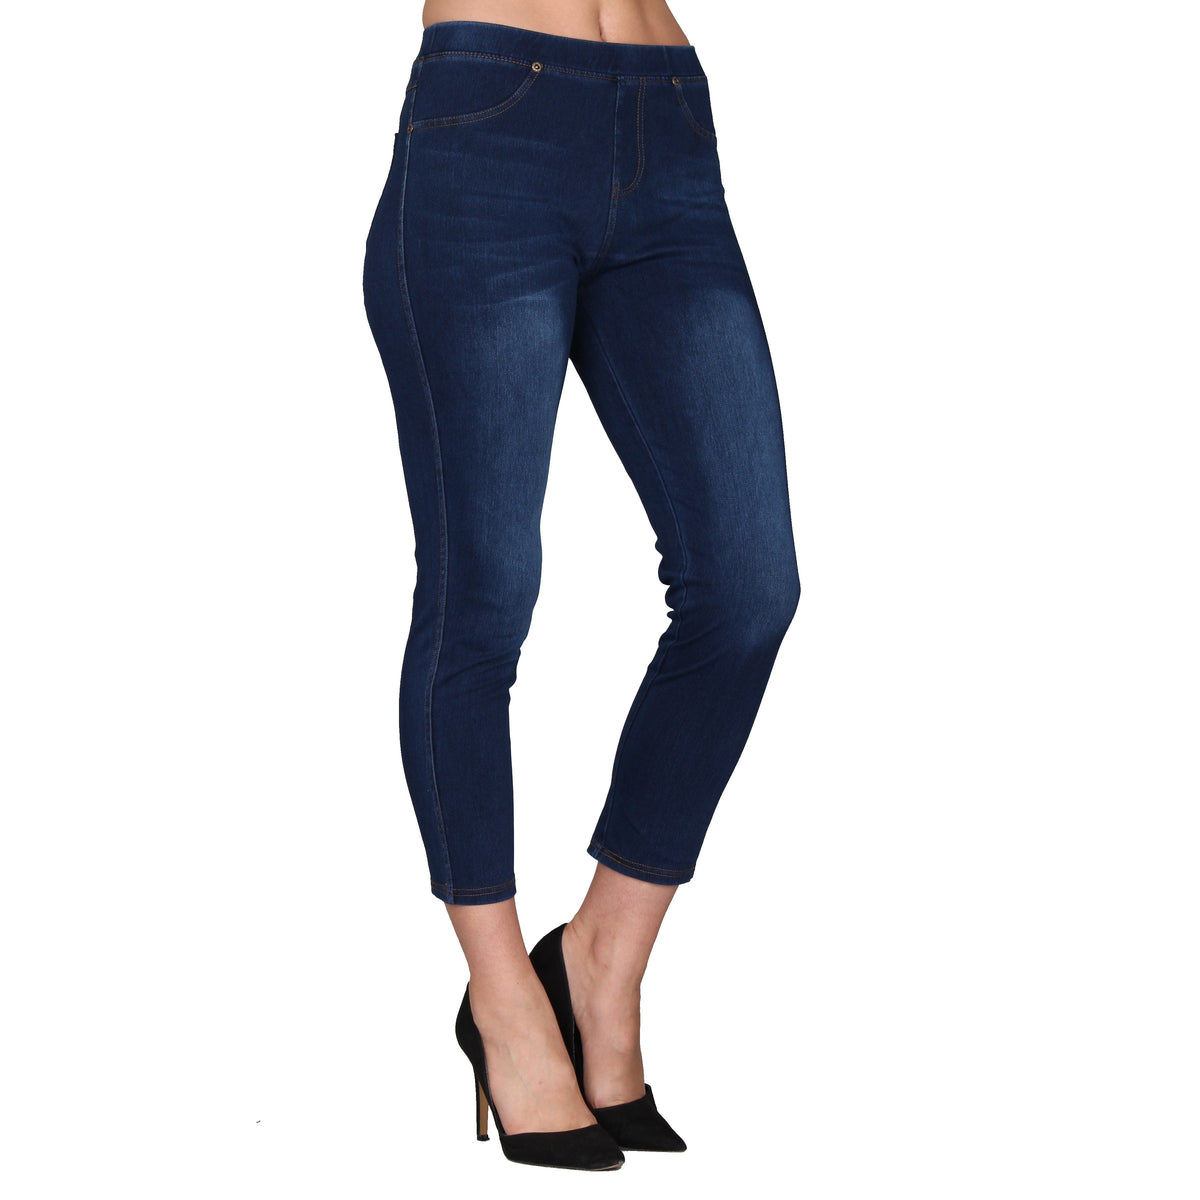 Women's Classic Skinny Capri Jeggings. • Capri jeggings featuring a light  sheen and jean-style • Lightweight, breathable cotton-blend material • Belt  loops with 5 functional pockets • Super Stretchy • Pull up